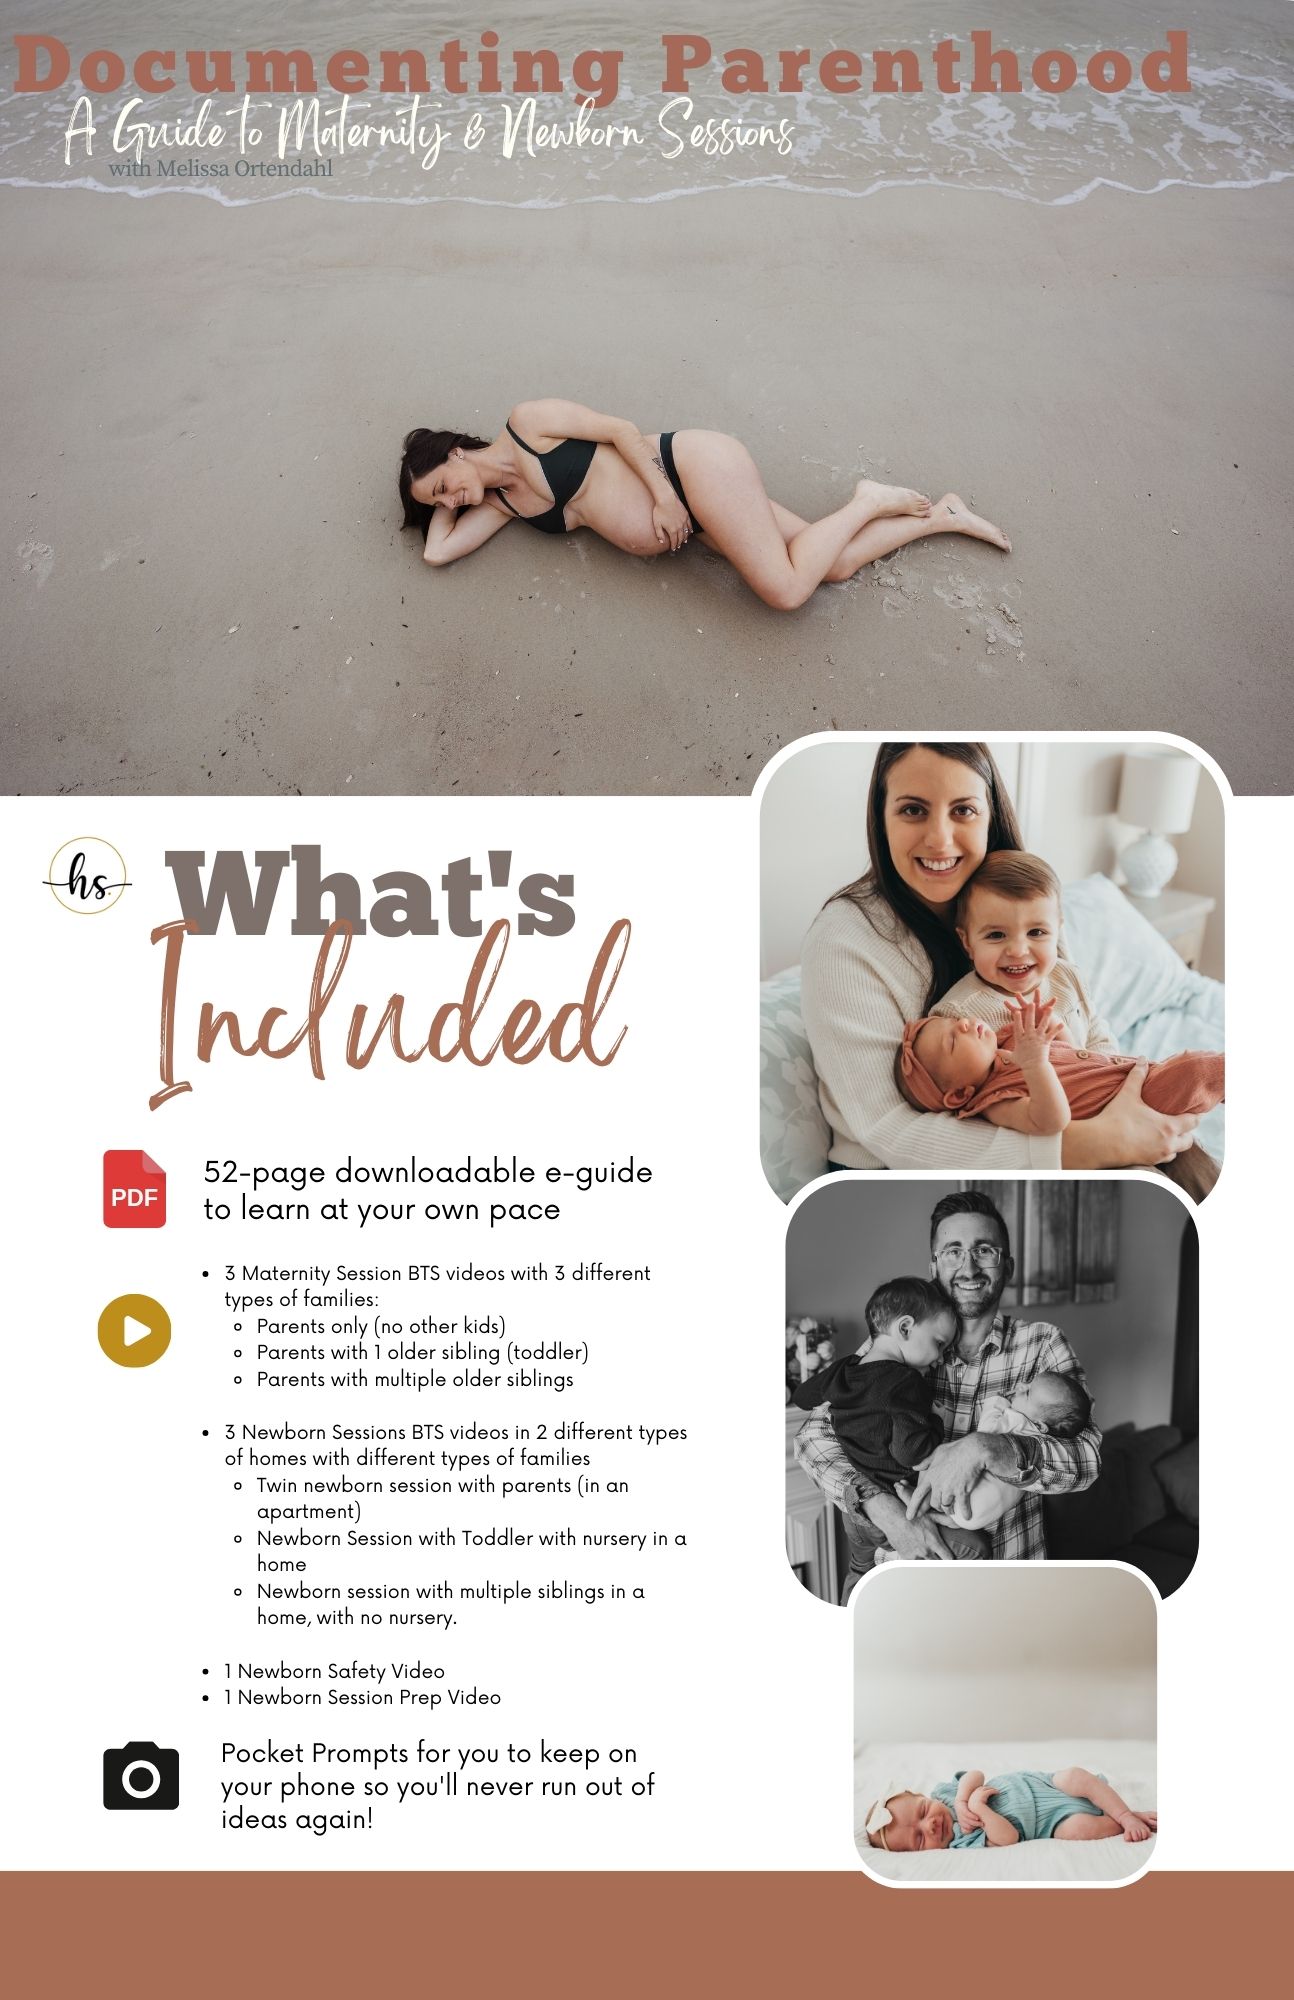 Documenting Parenthood: A Guide to Maternity and Newborn Sessions